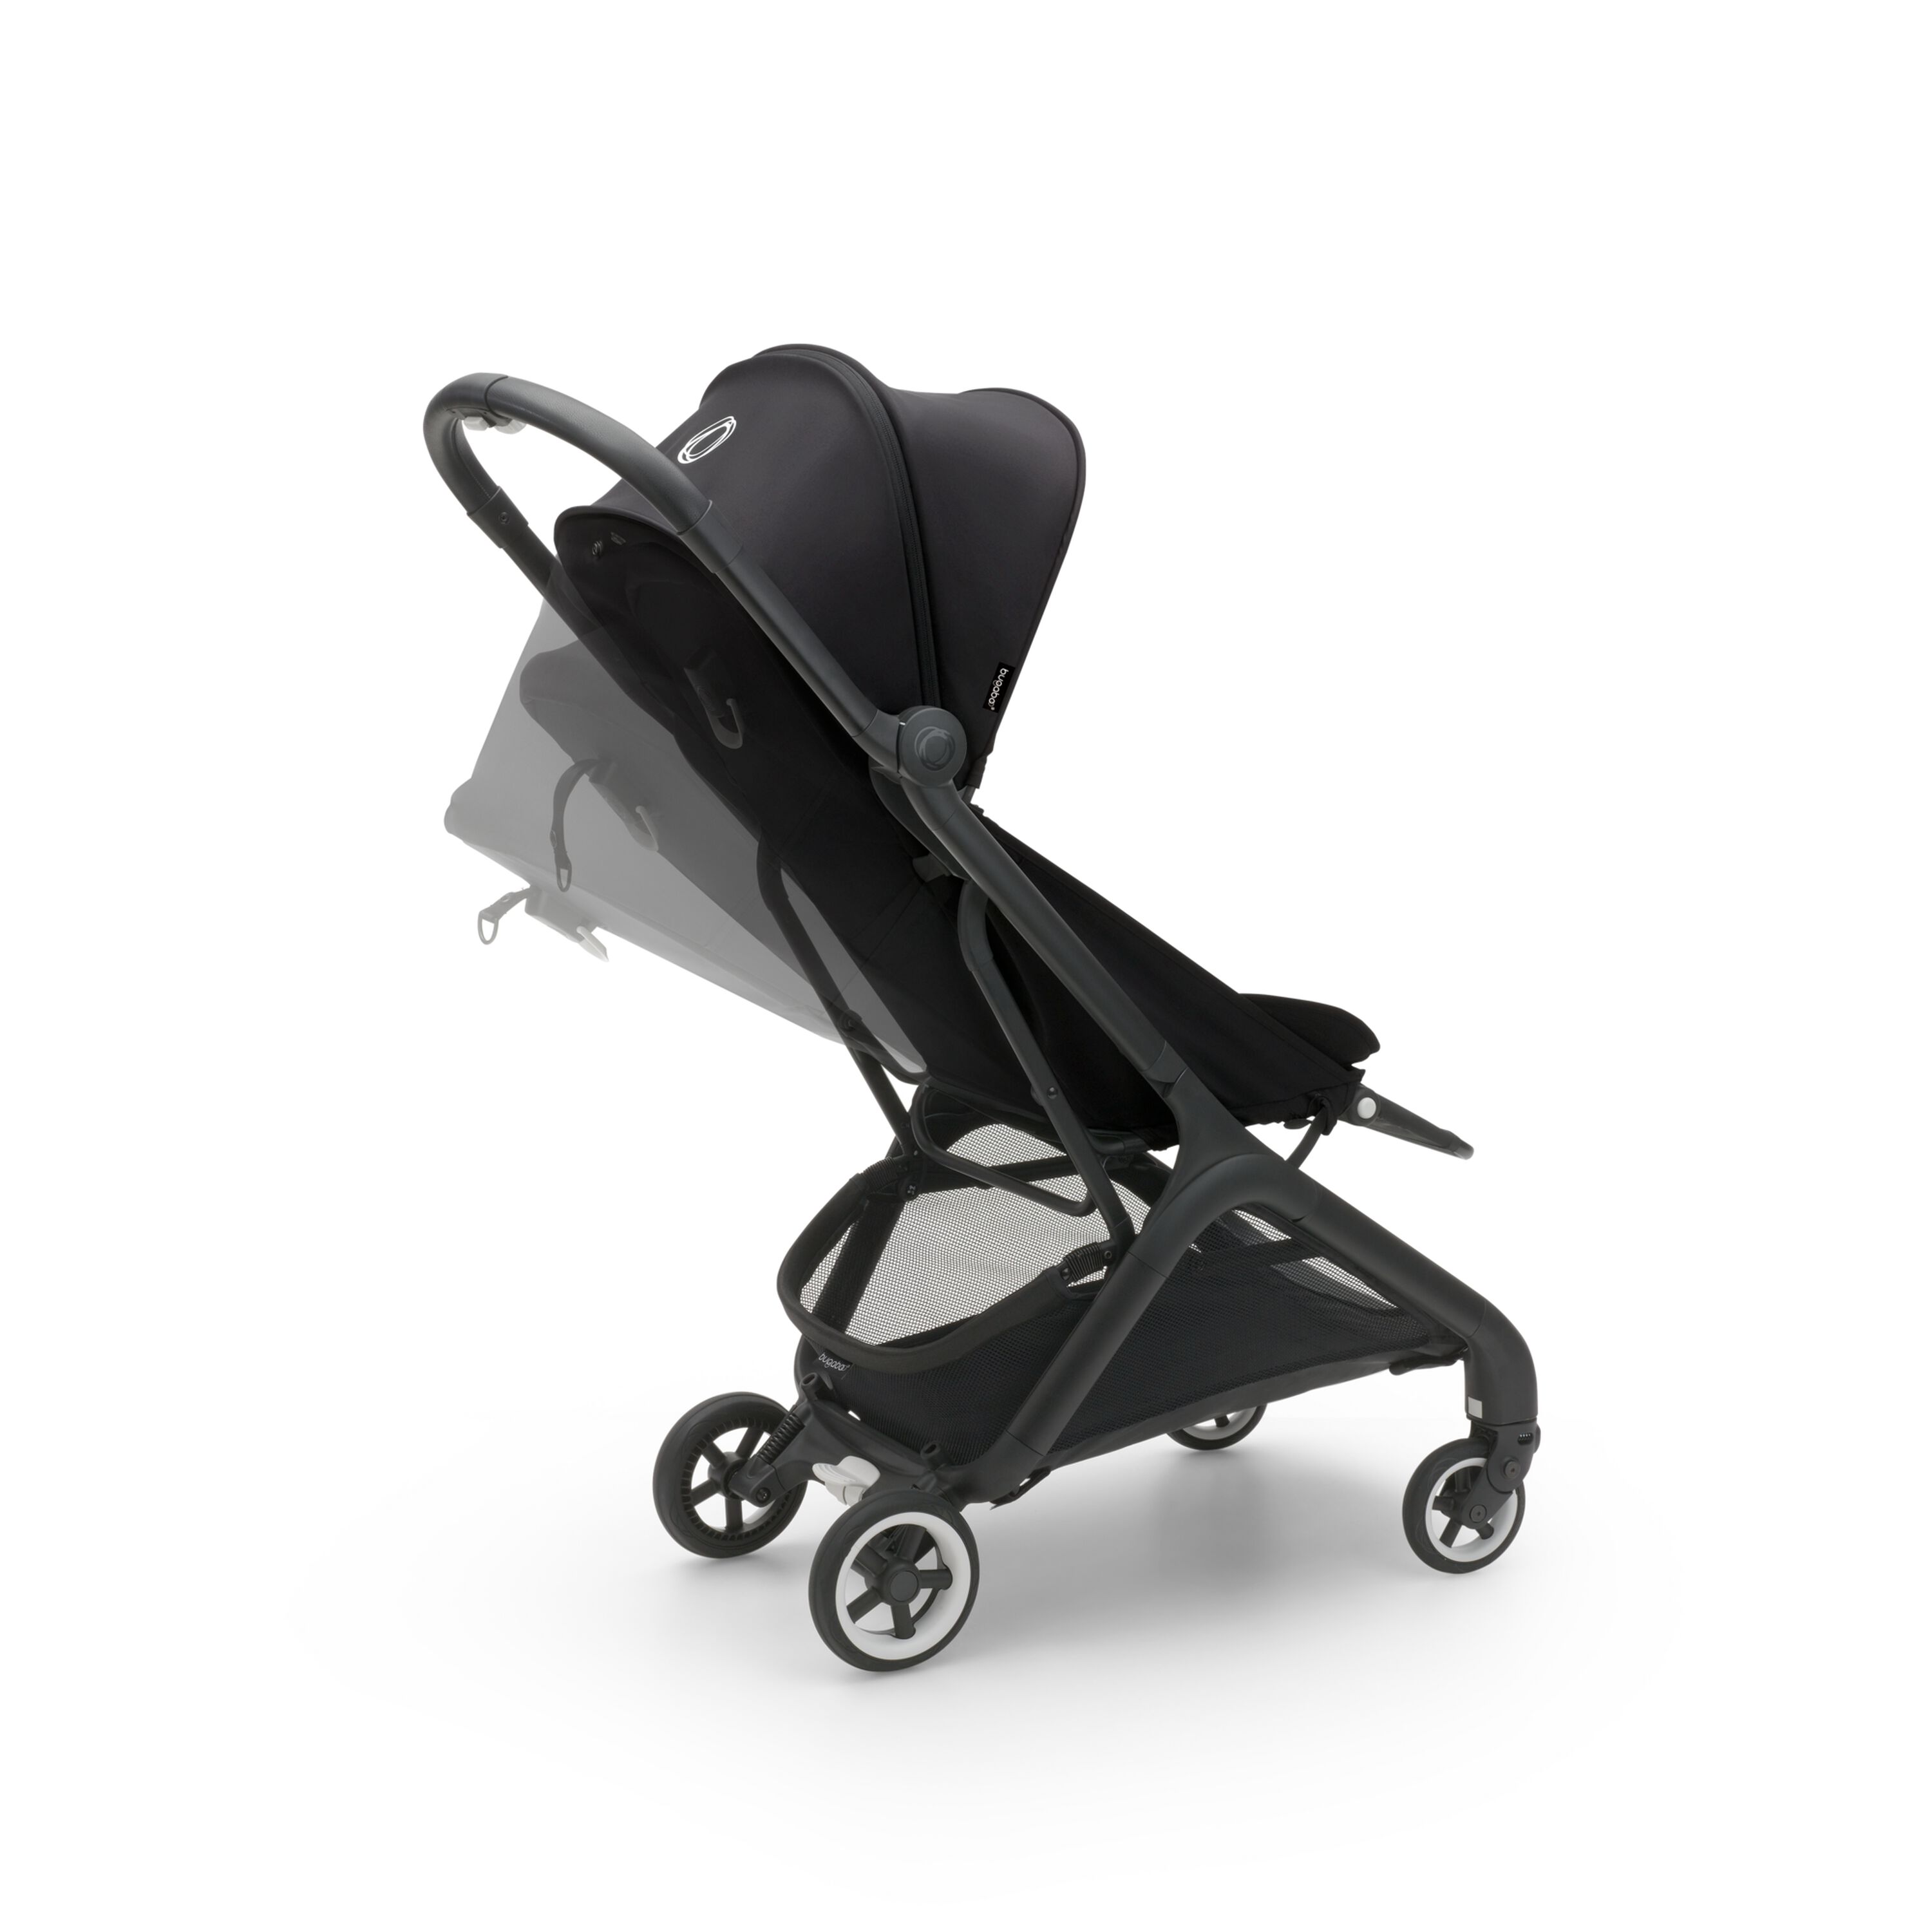 Bugaboo Butterfly seat stroller Desert taupe sun canopy, desert taupe  fabrics, black chassis